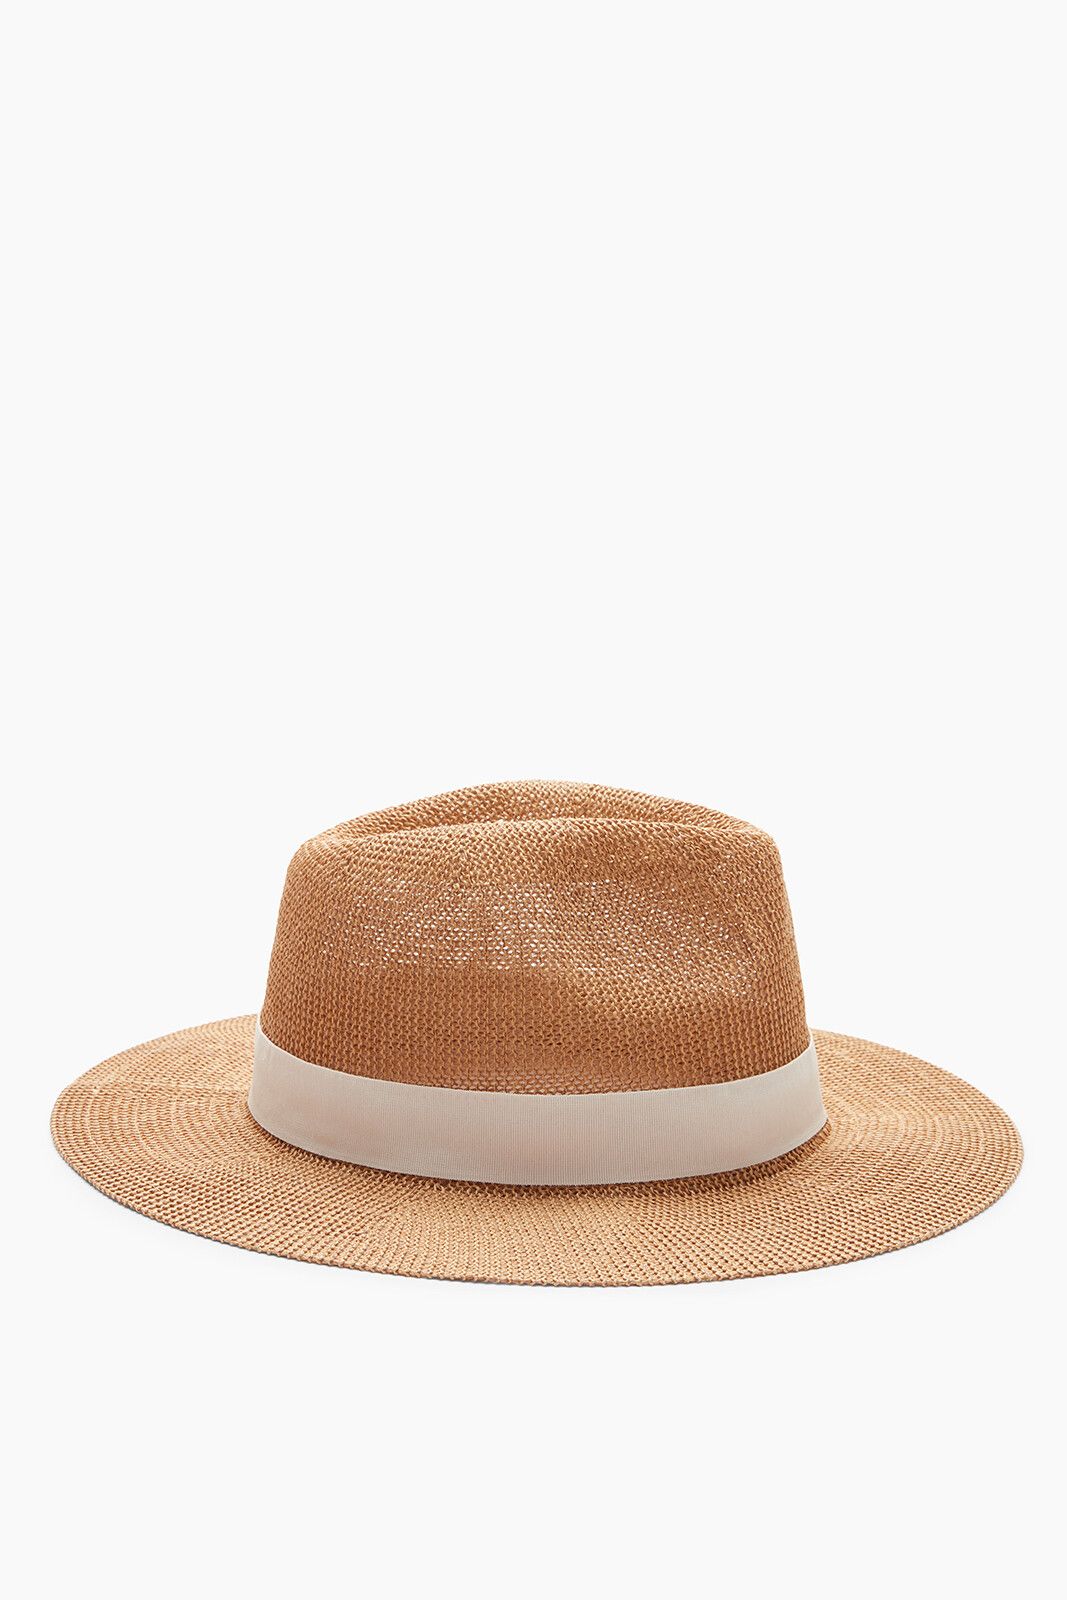 HARRIET ISLES Sutton Packable Straw Hat | EVEREVE | Evereve